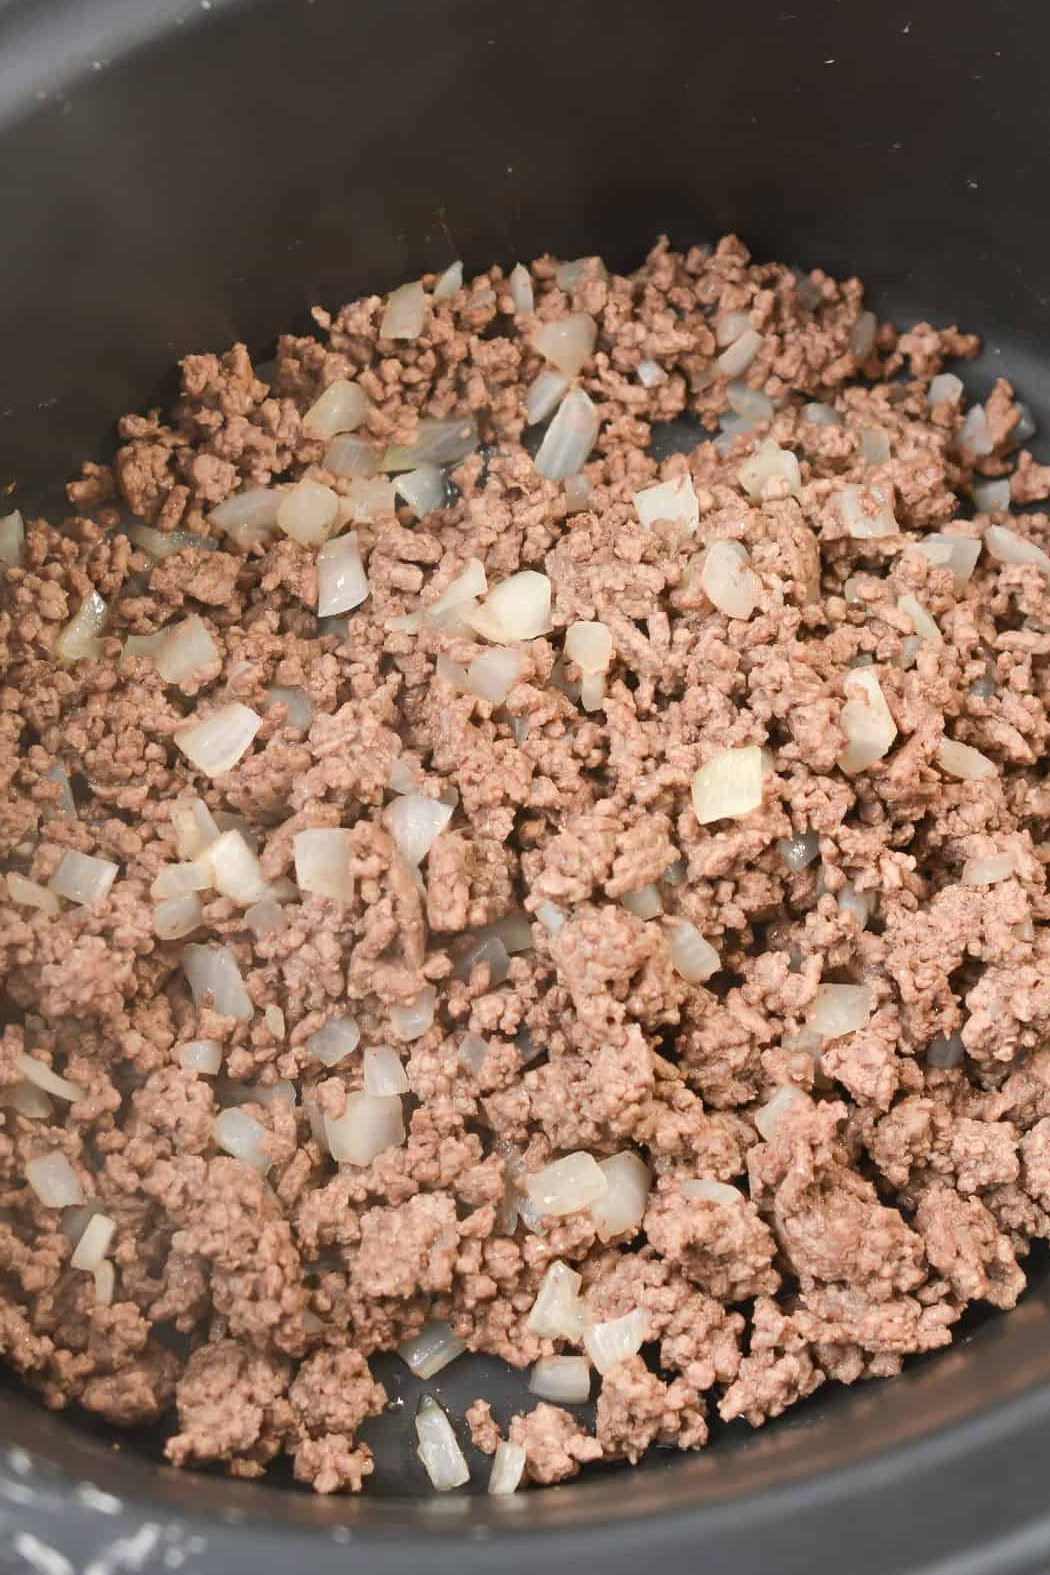 Place the meat mixture into the bottom of a crockpot.